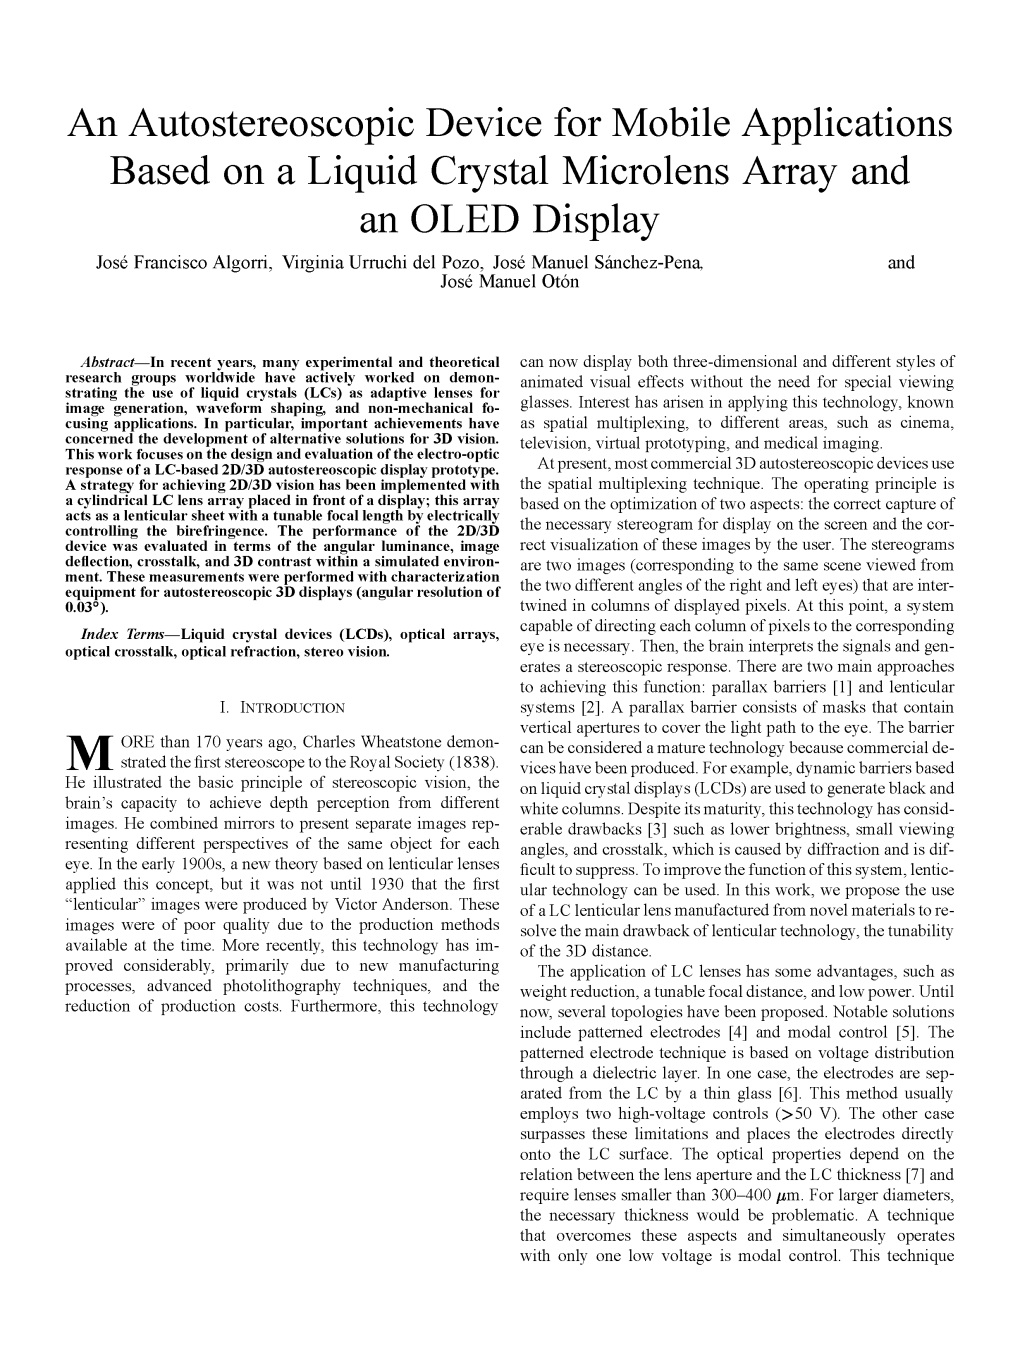 An Autostereoscopic Device for Mobile Applications Based on a Liquid Crystal Microlens Array and an OLED Display